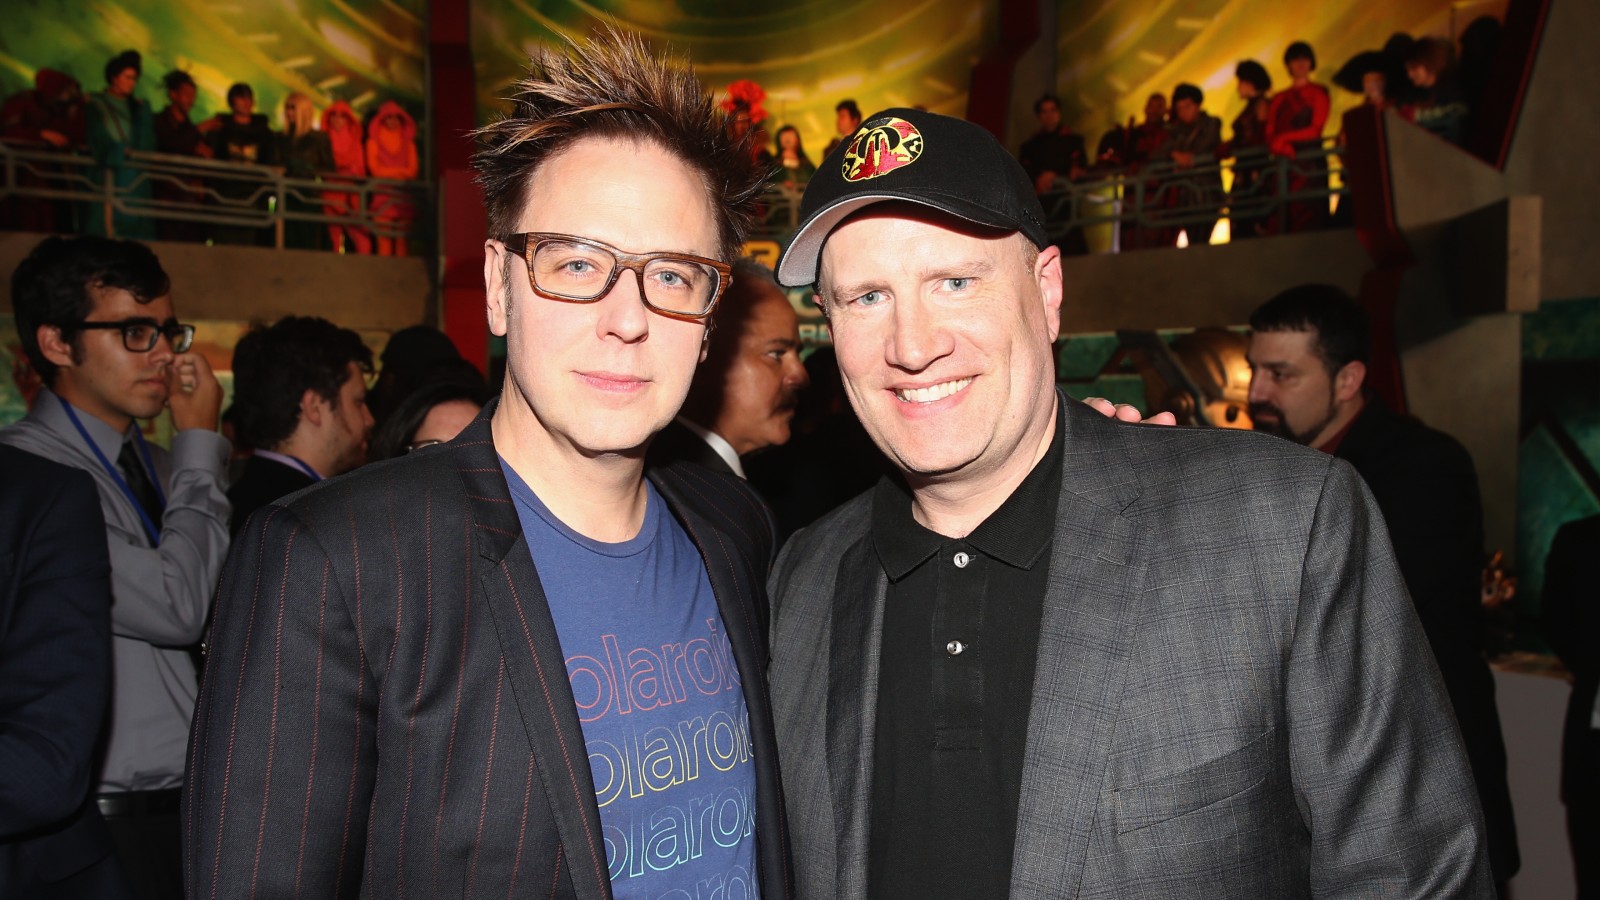 James Gunn and Kevin Feige pose for a photo together at a red carpet event.